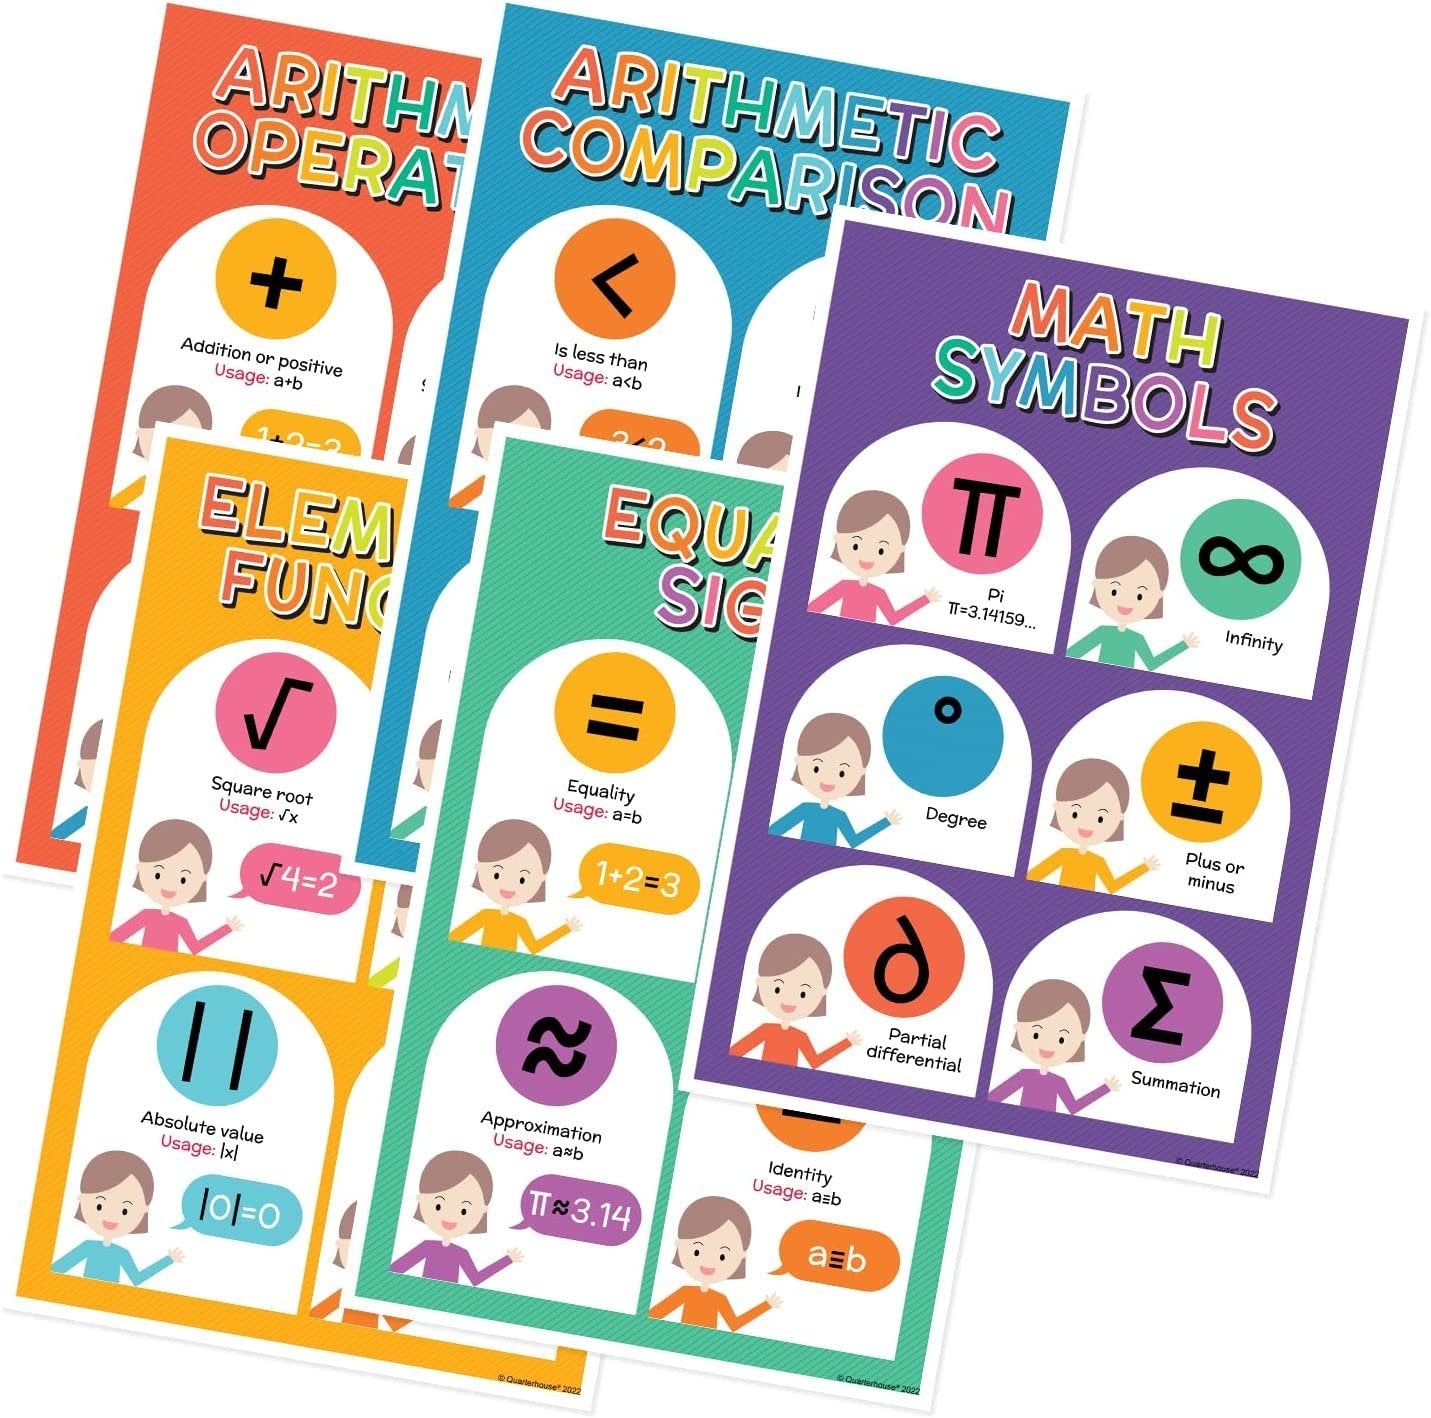 Quarterhouse Math Symbols Poster Set, Math Classroom Learning Materials for K-12 Students and Teachers, Set of 5, 12 x 18 Inches, Extra Durable